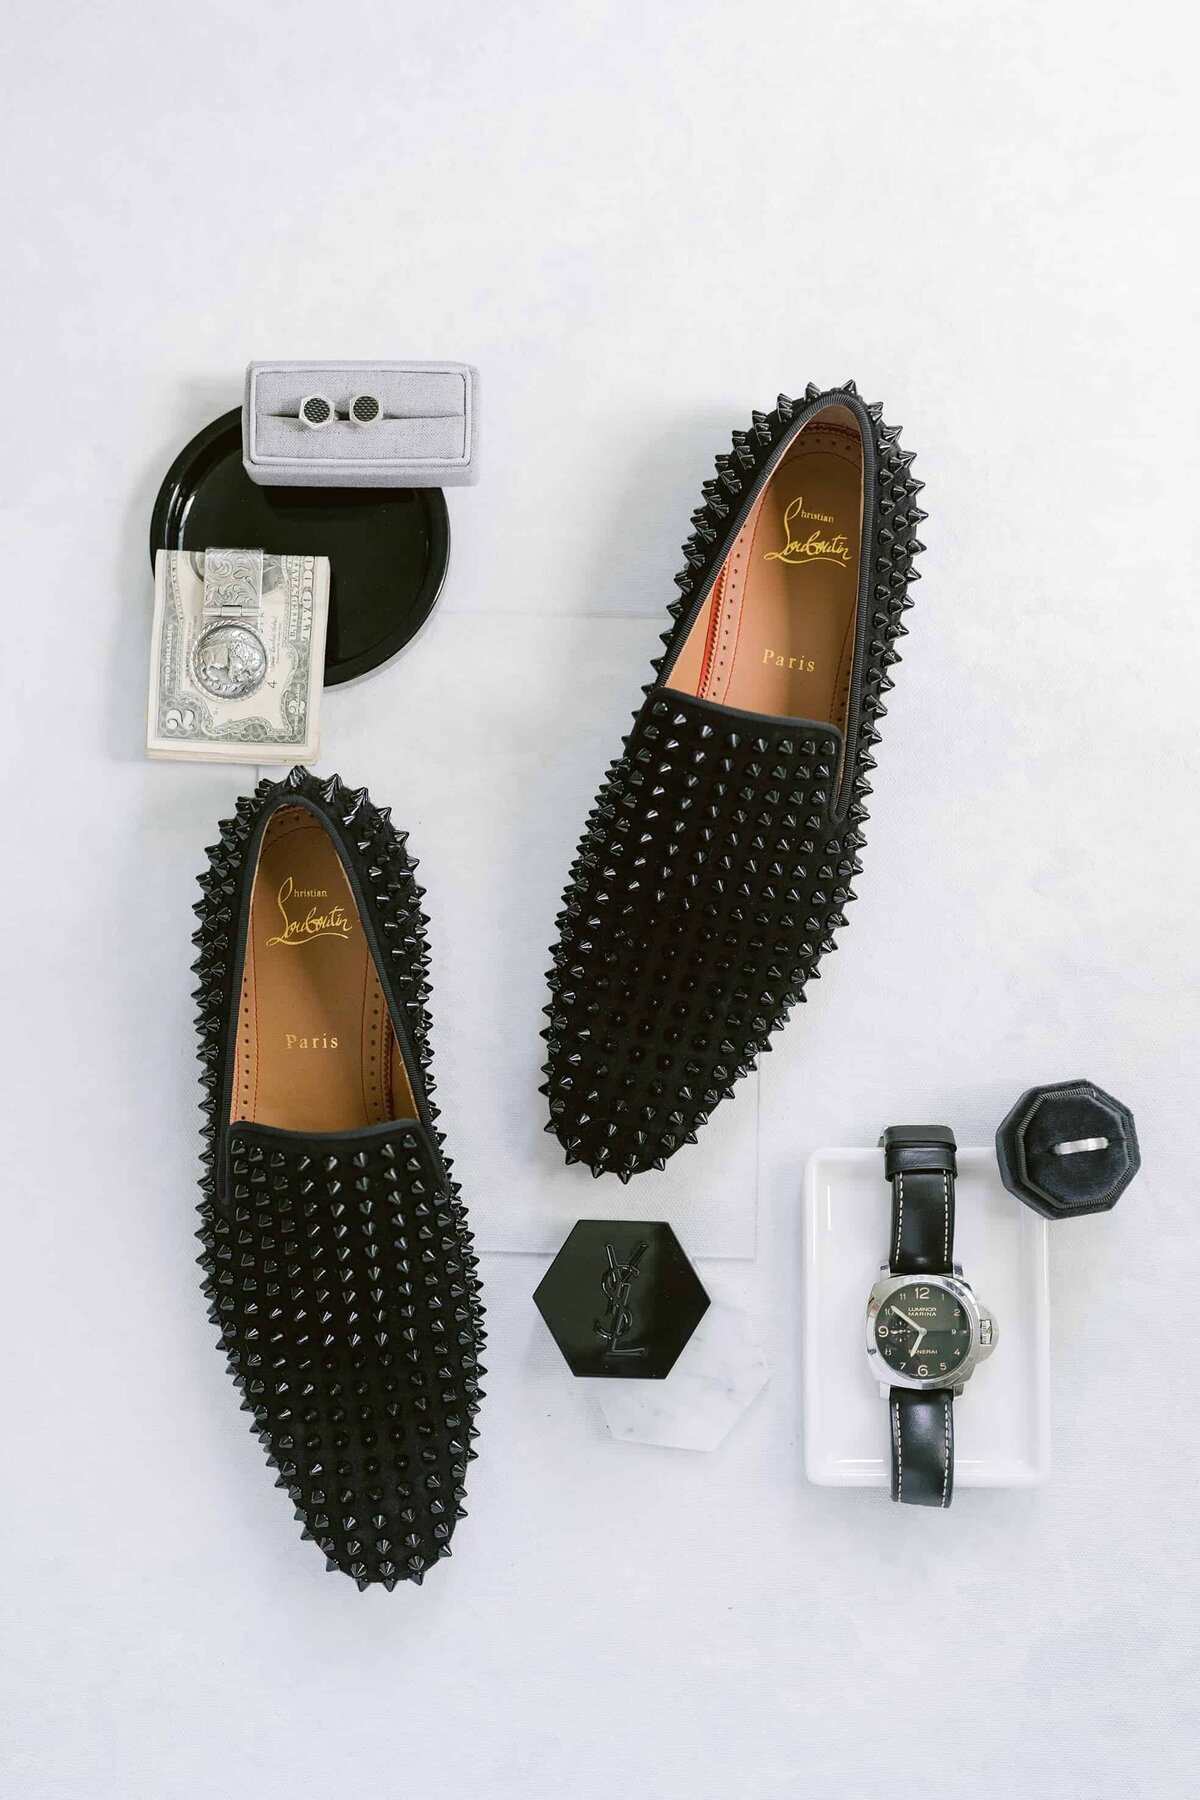 Groom's black studded shoes, watch, and cufflinks before the wedding